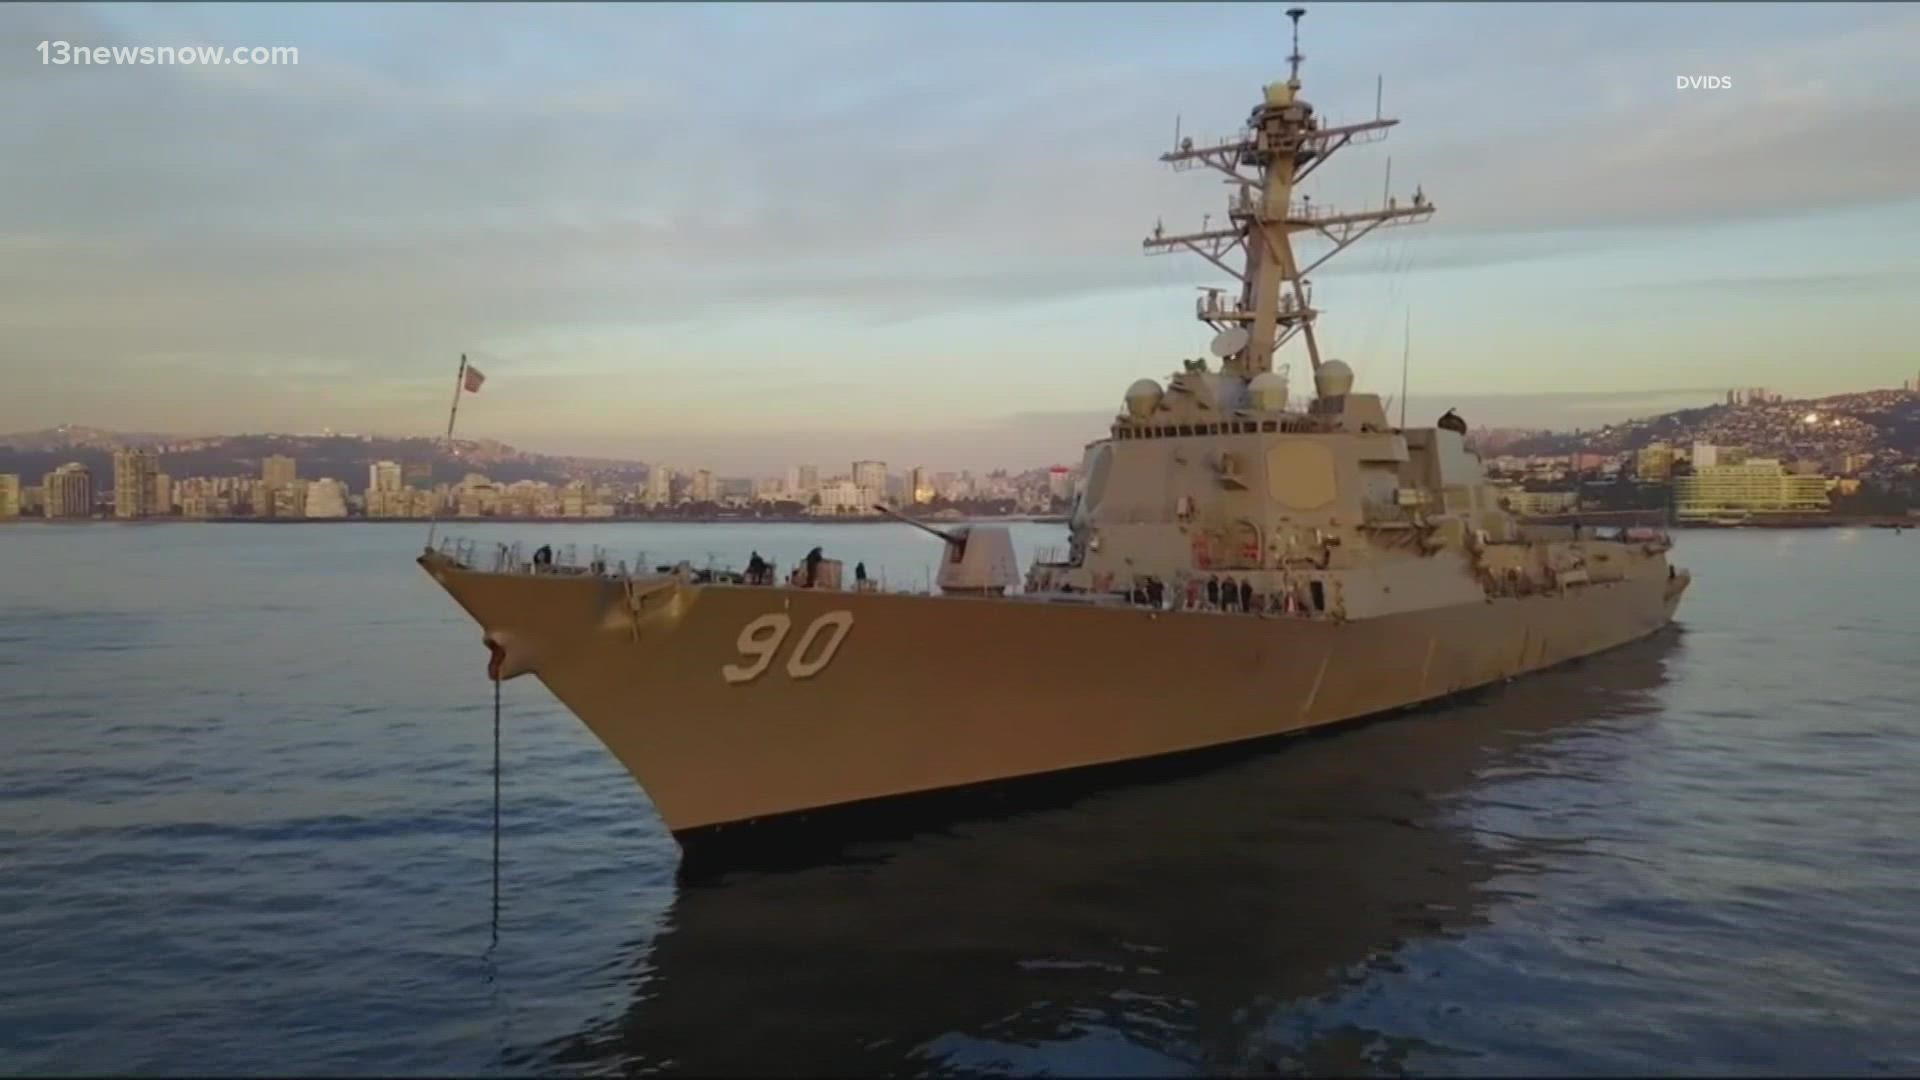 The Navy said USS Chafee was conducting "routine operations" in international waters when a Russian destroyer came within approximately 65 yards of the ship.